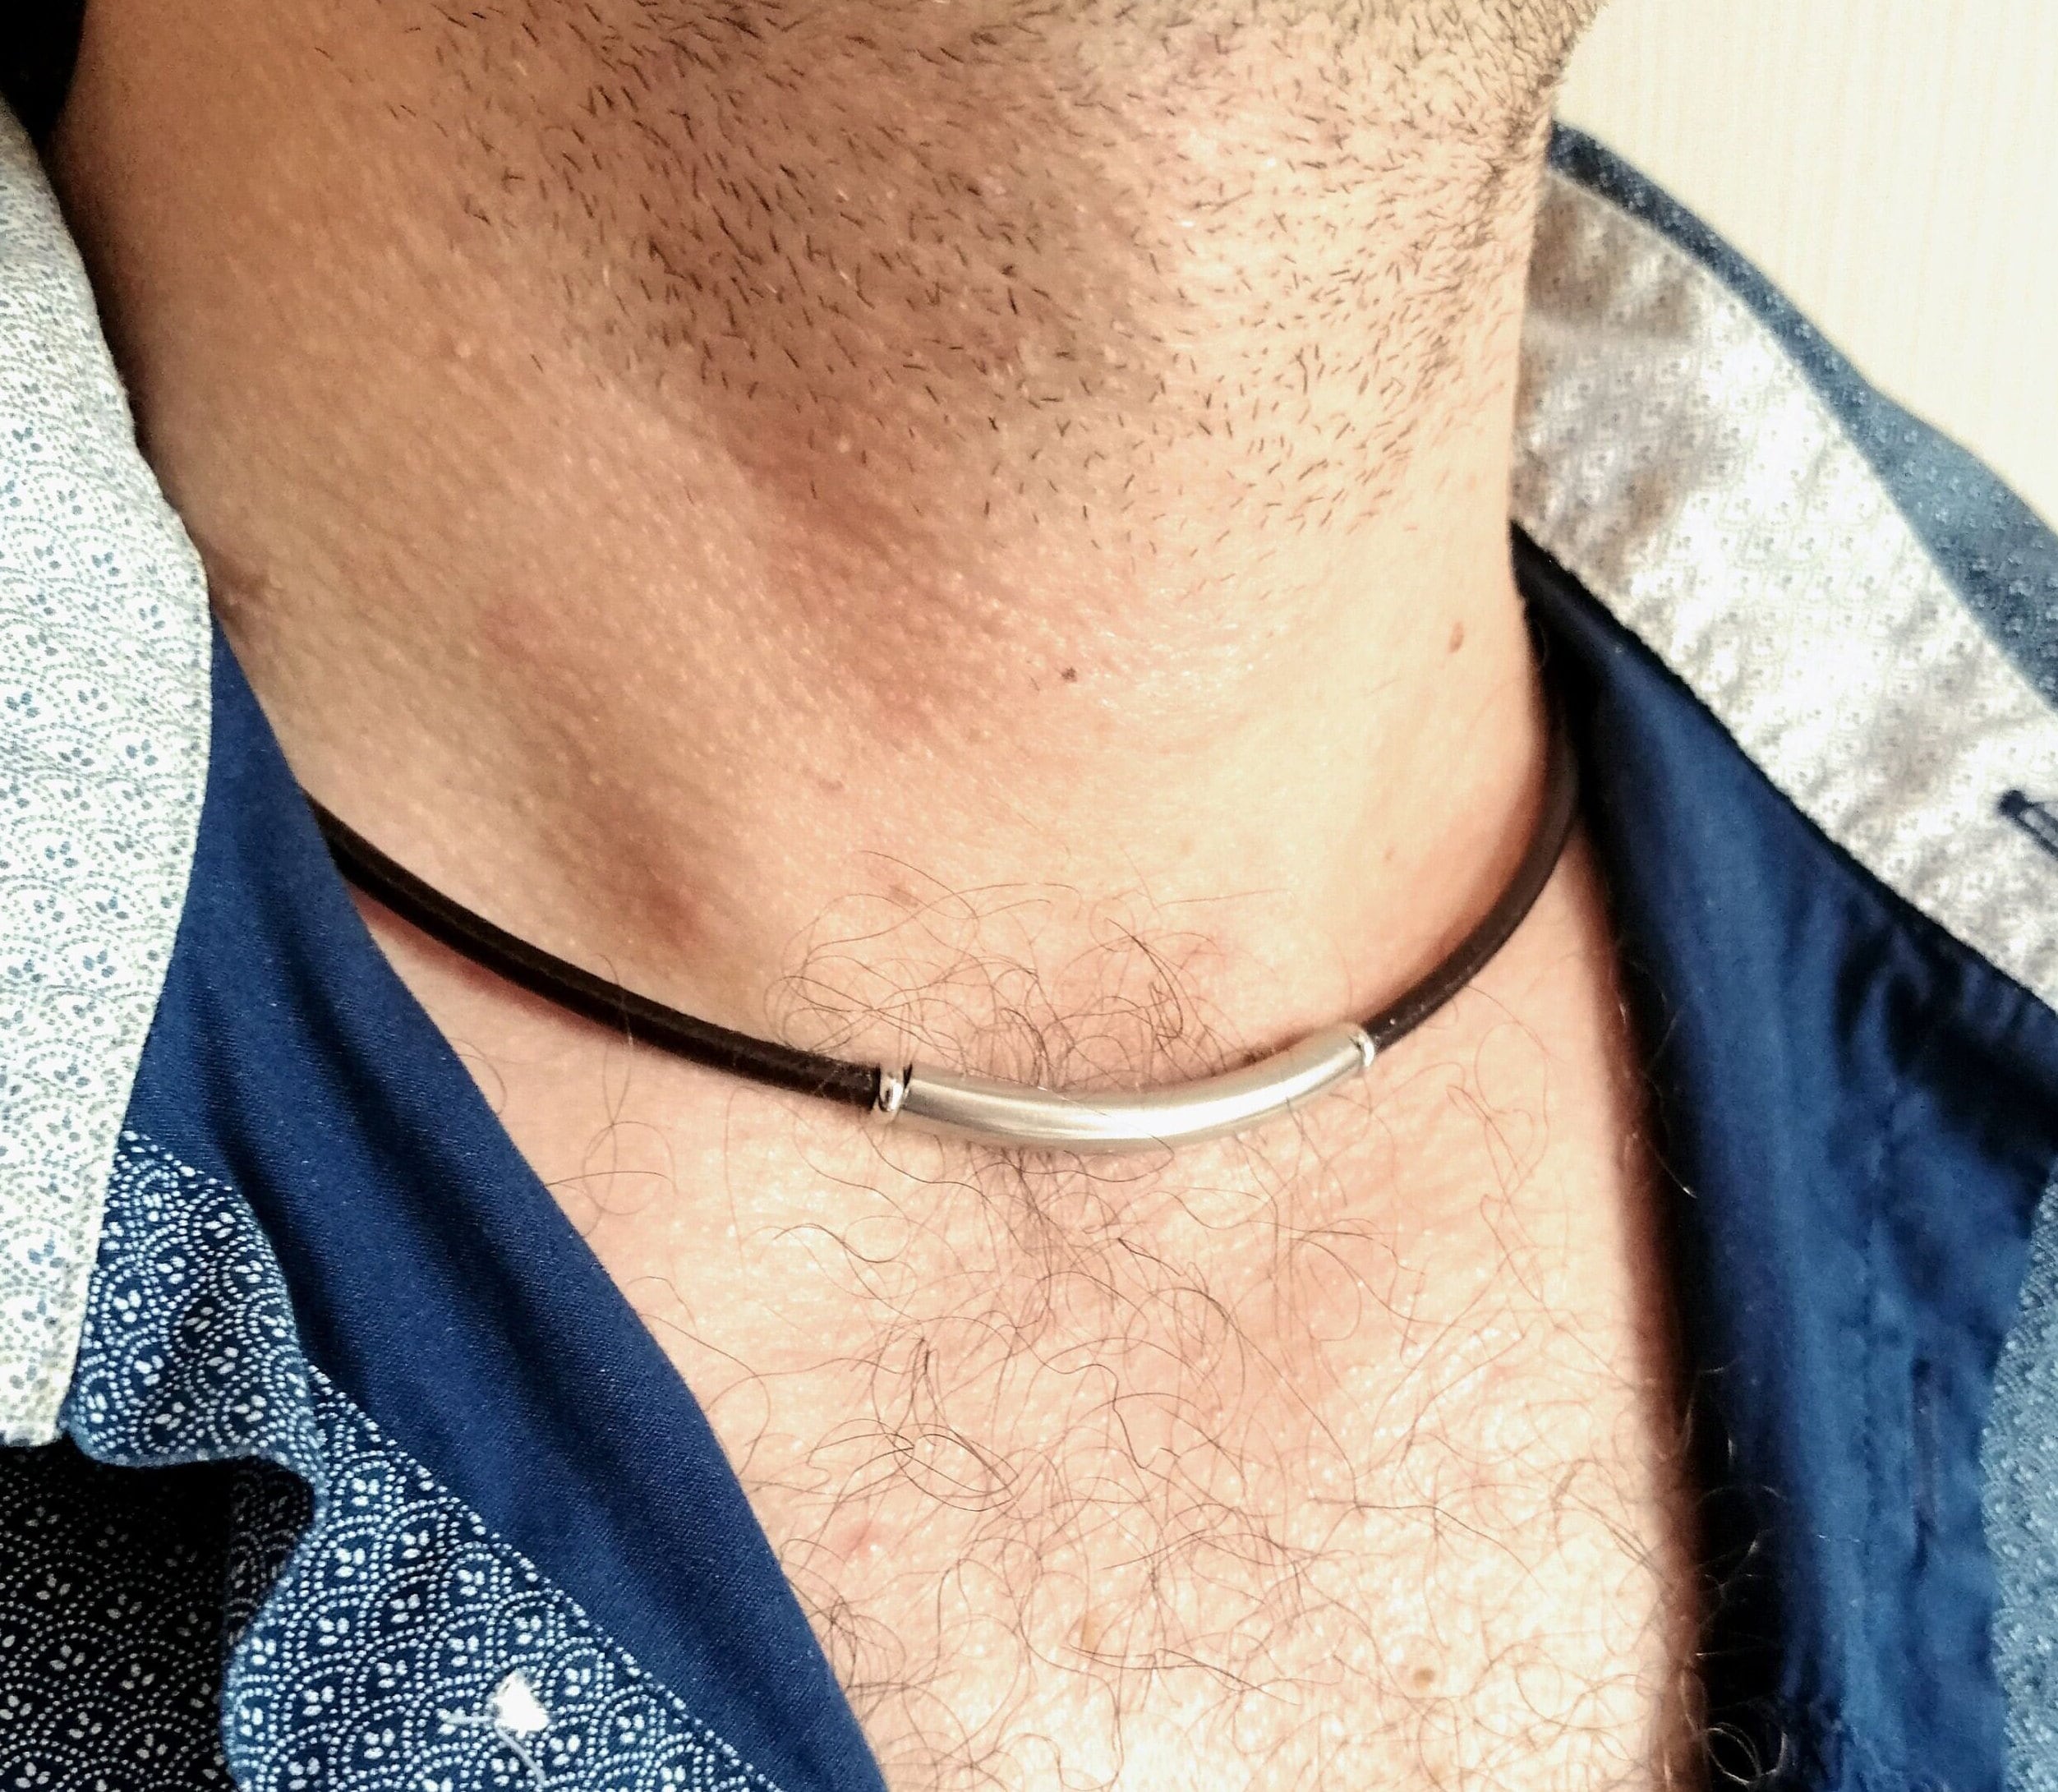 Black leather choker necklace for men with Jade and silver beads